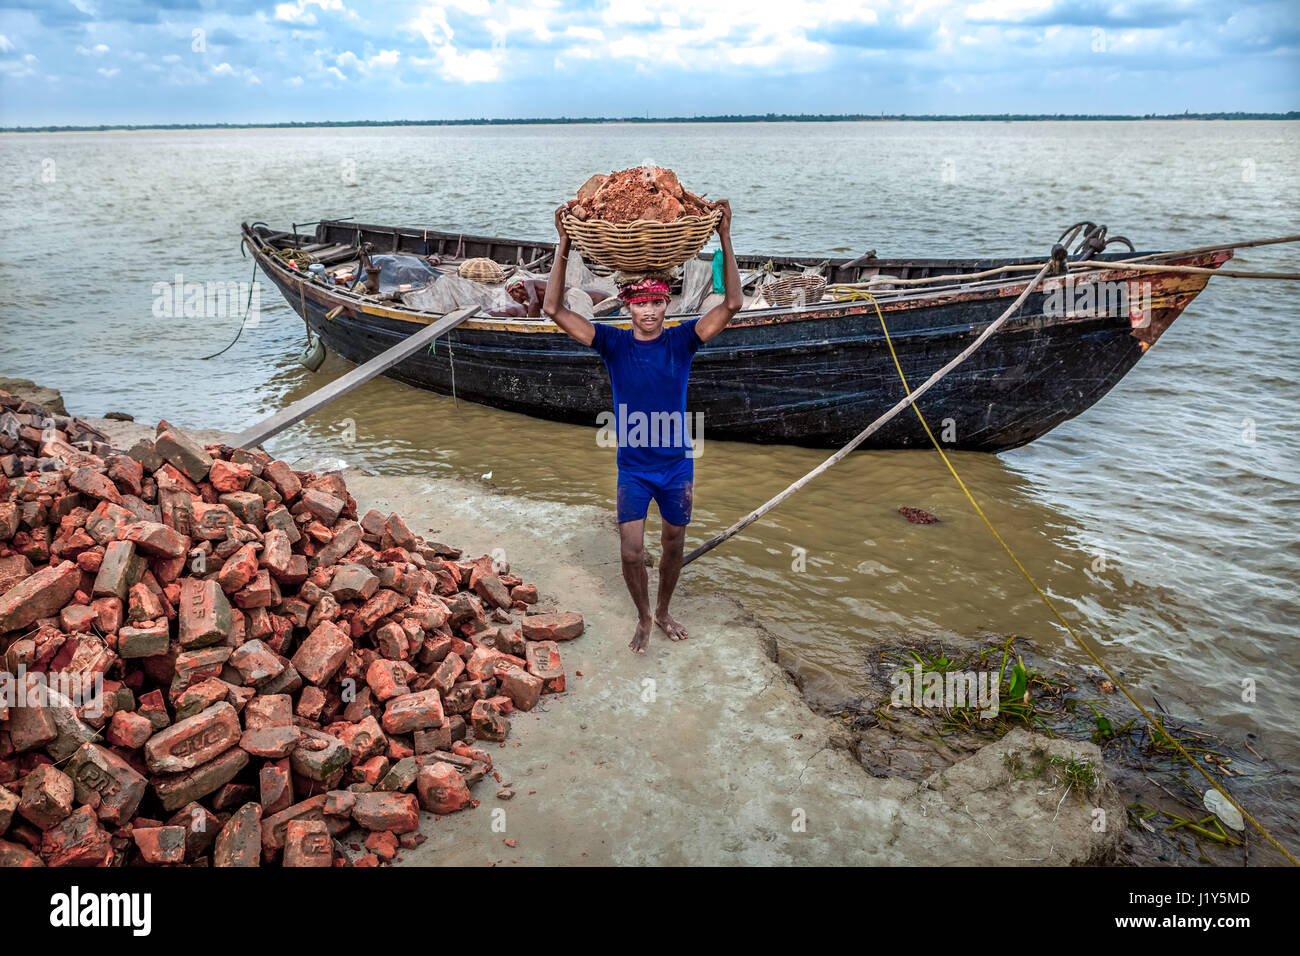 A worker transporting pieces of red brick from a wooden boat onto the Rupnarayan riverbank for river erosion control project. Stock Photo